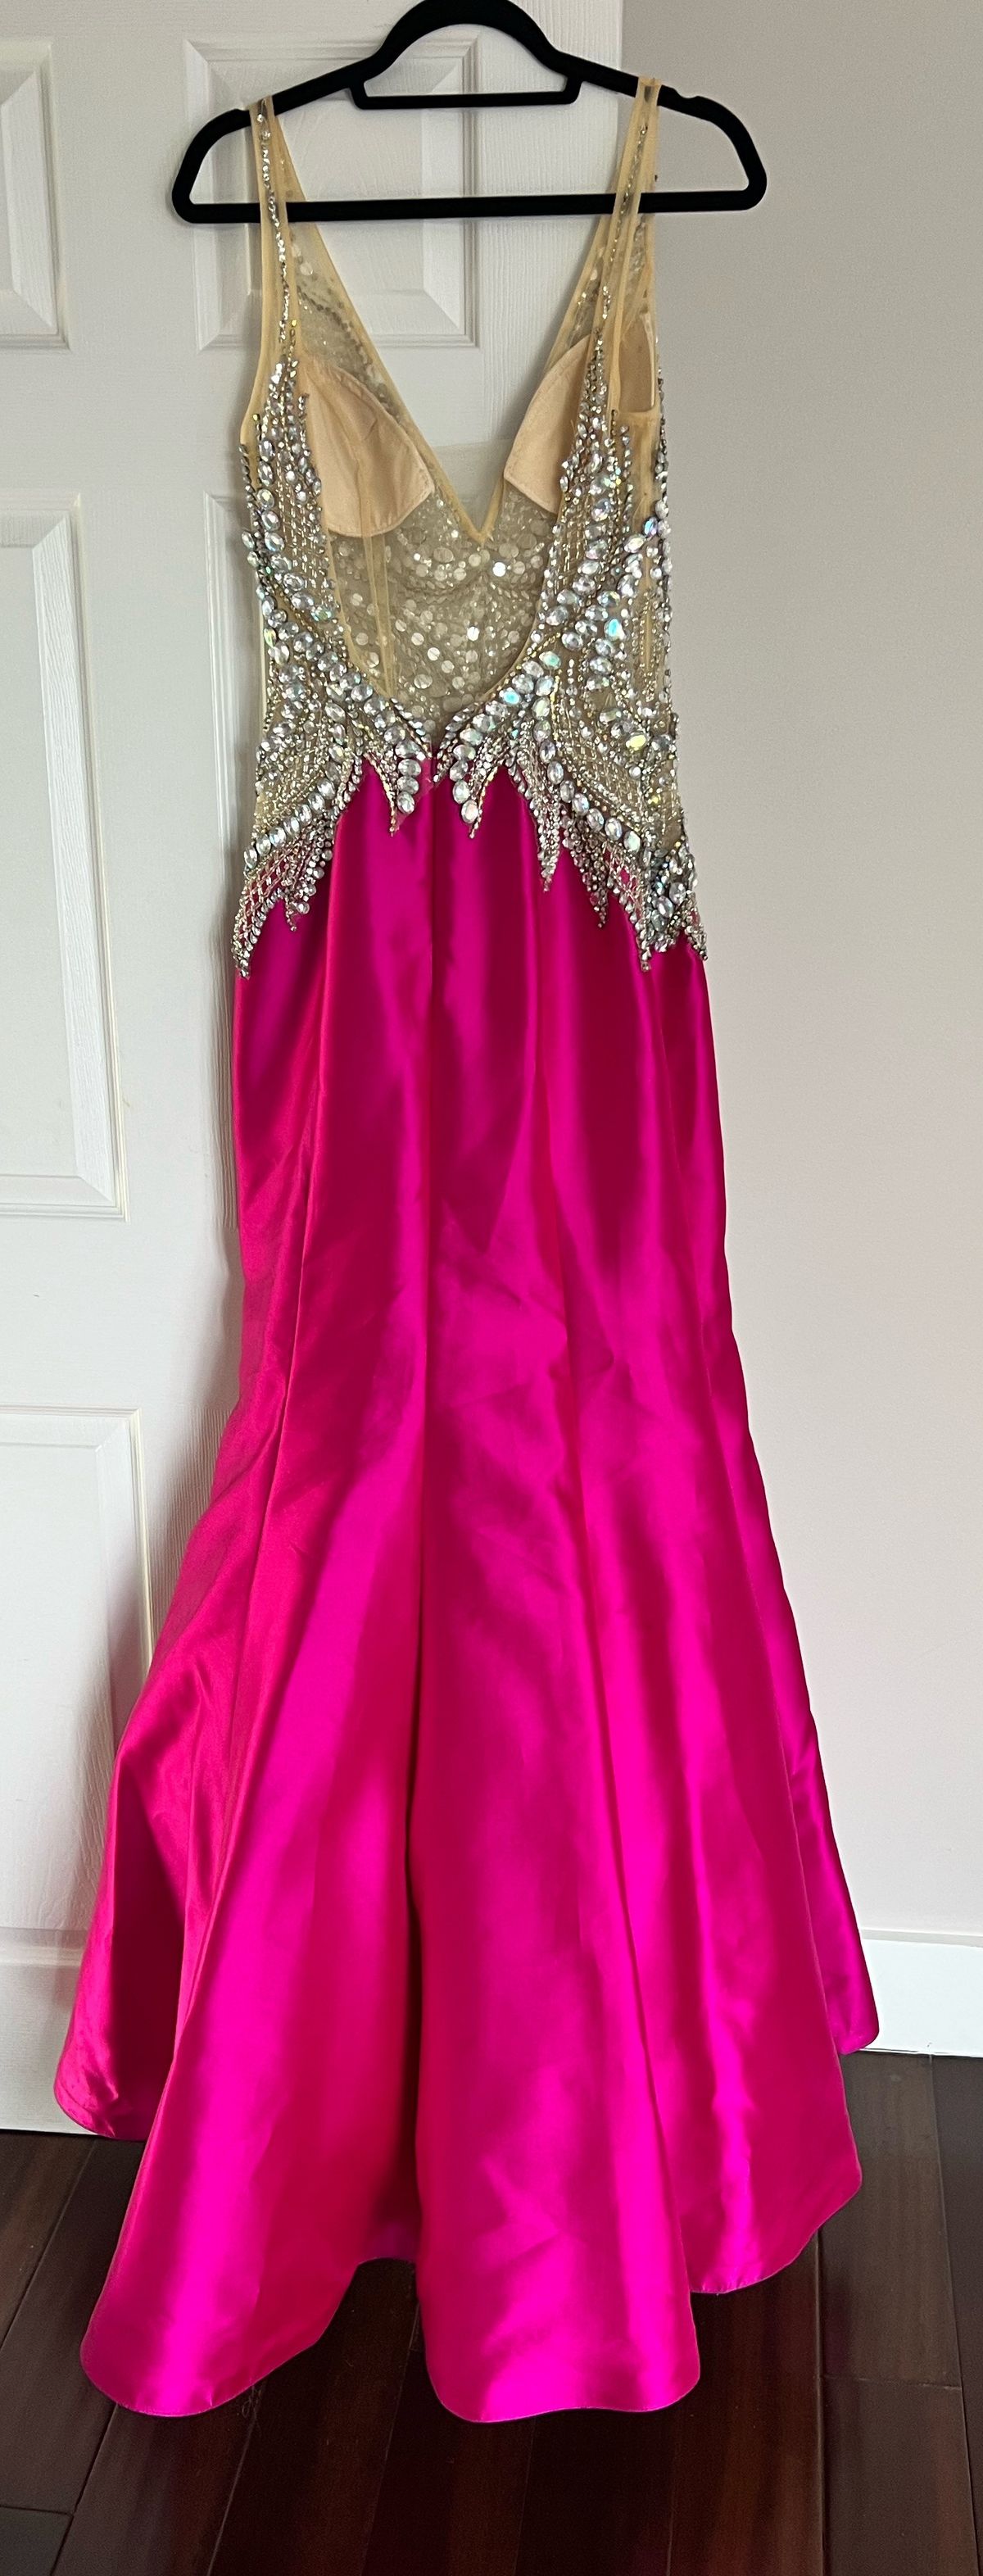 Jovani Size 10 Prom Plunge Sequined Hot Pink Mermaid Dress on Queenly